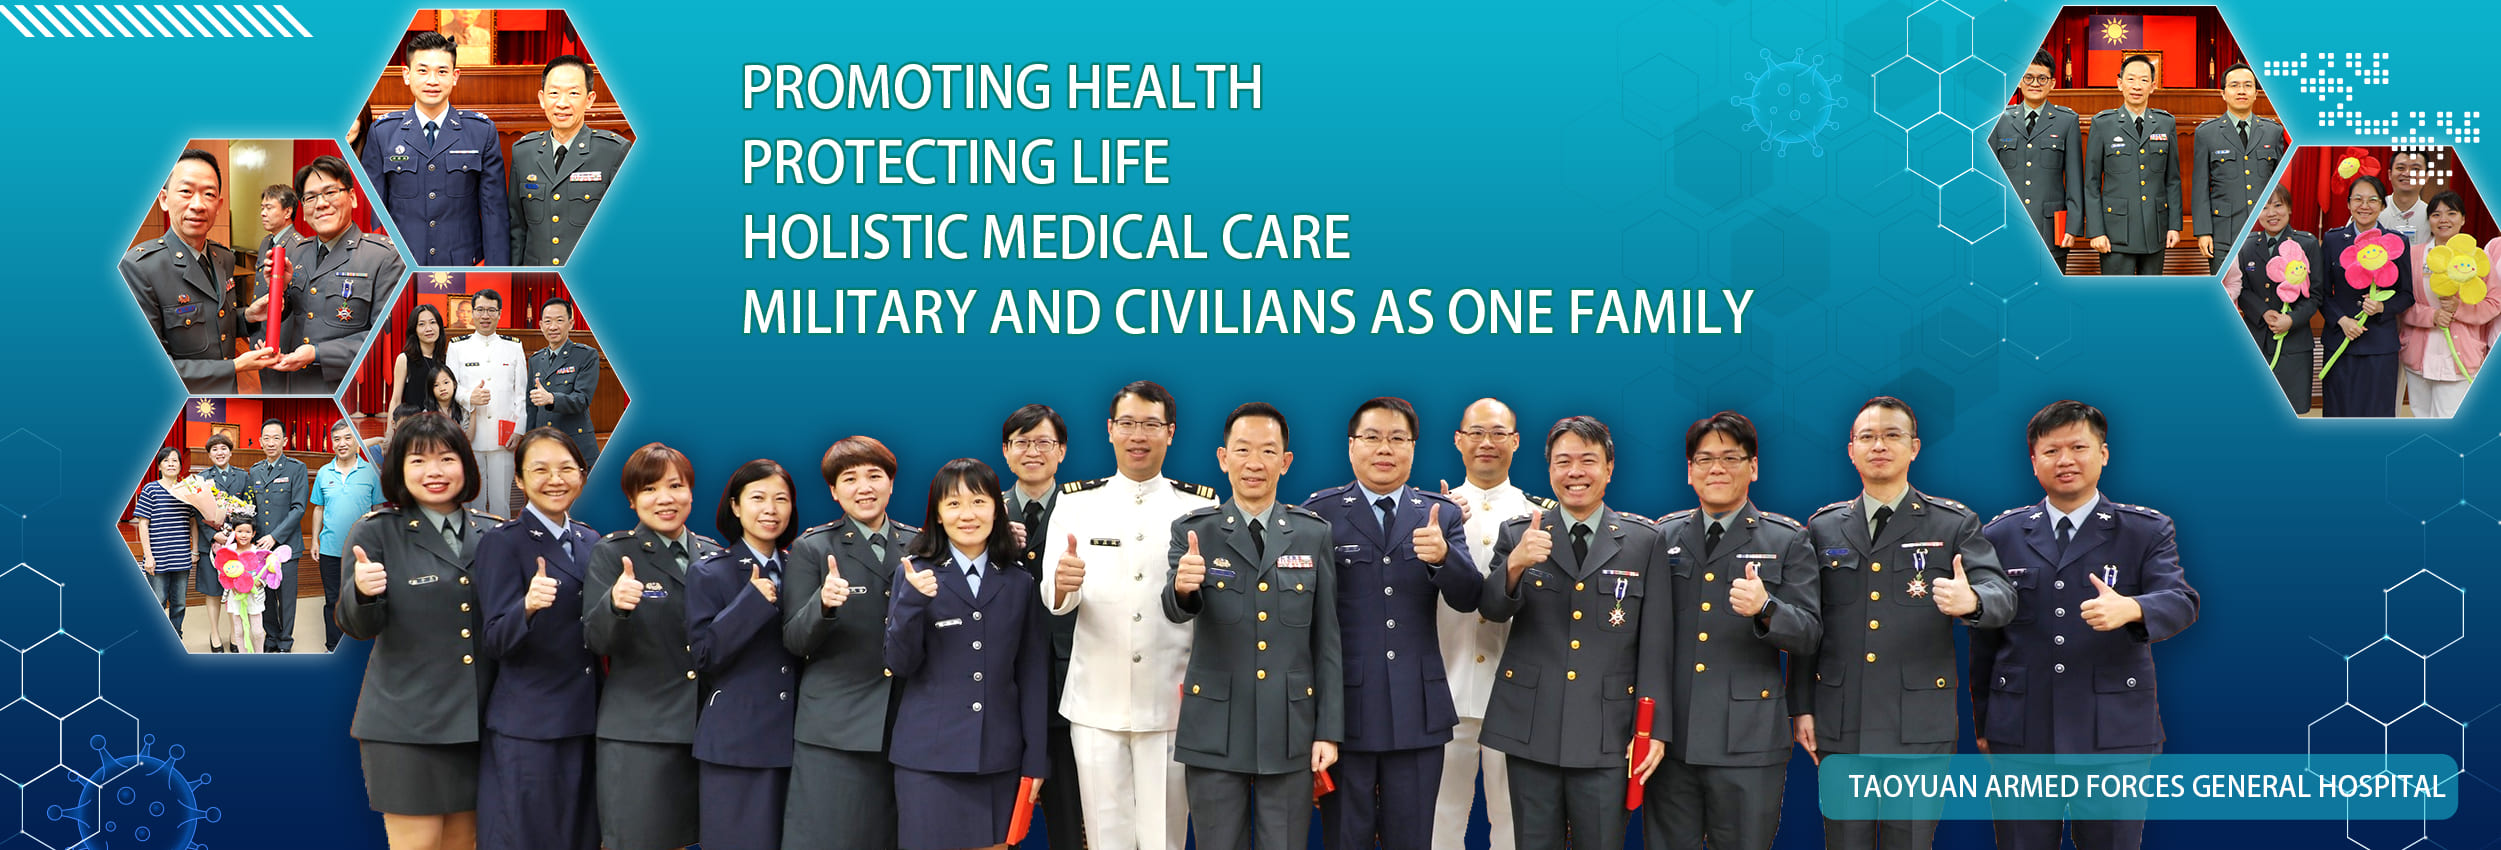 Promoting health, protecting life, holistic medical care, military and civilians as one family